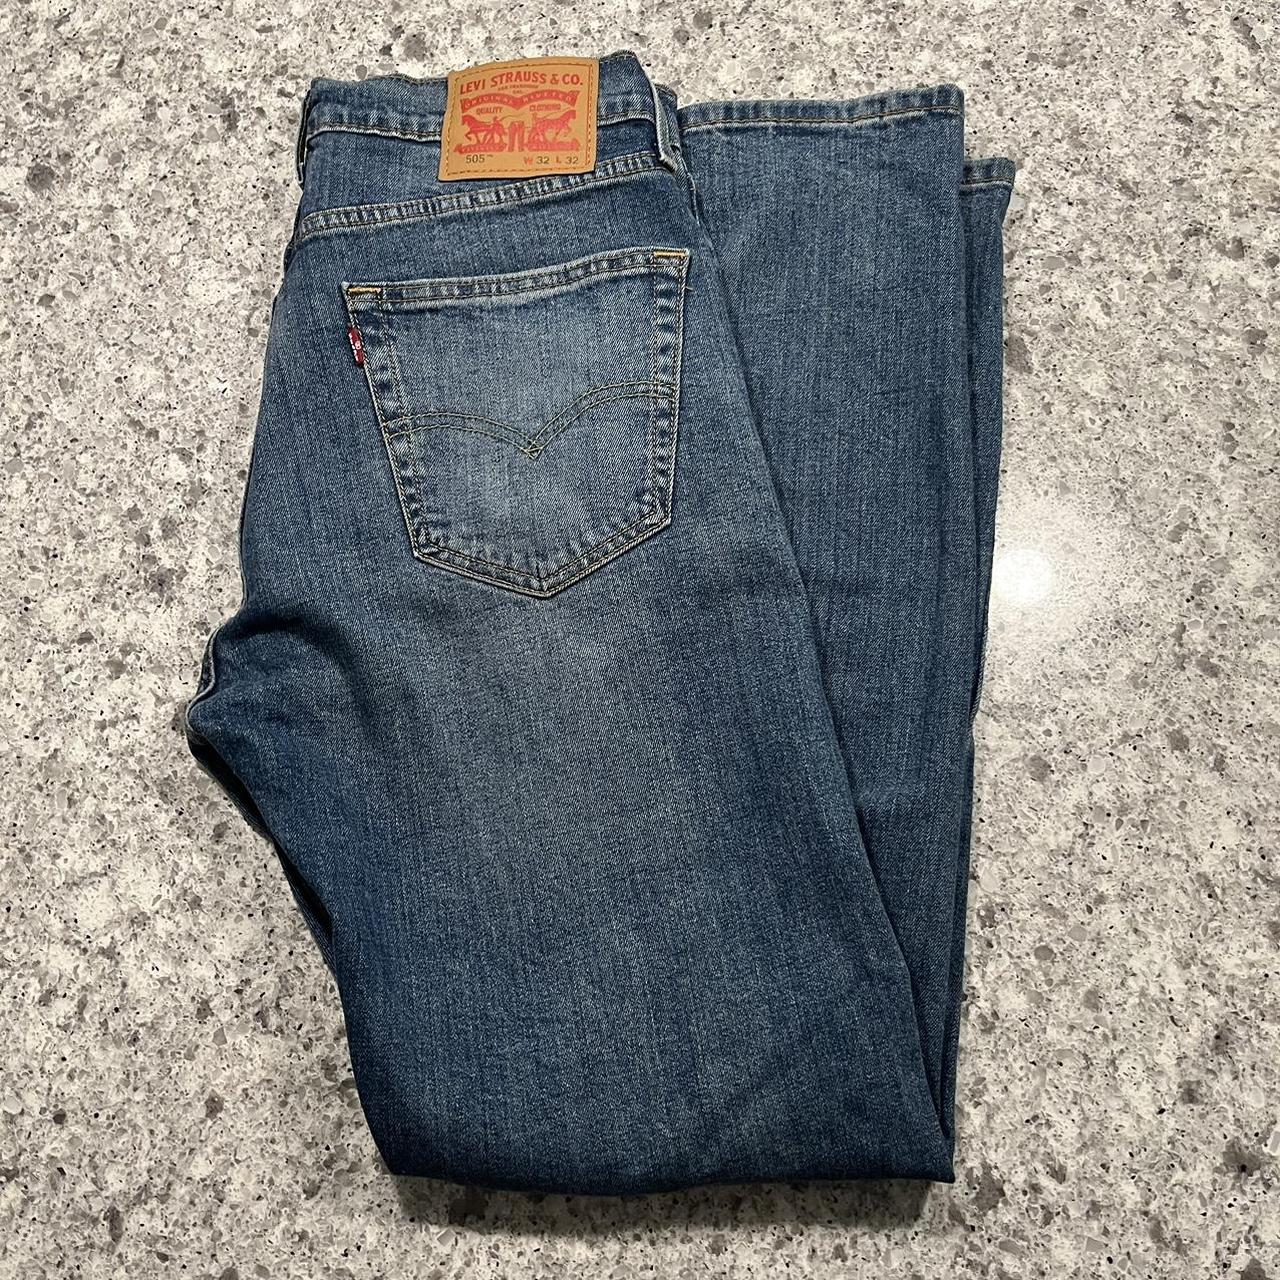 Nice Levis jeans 32/32 Great condition, nice for... - Depop